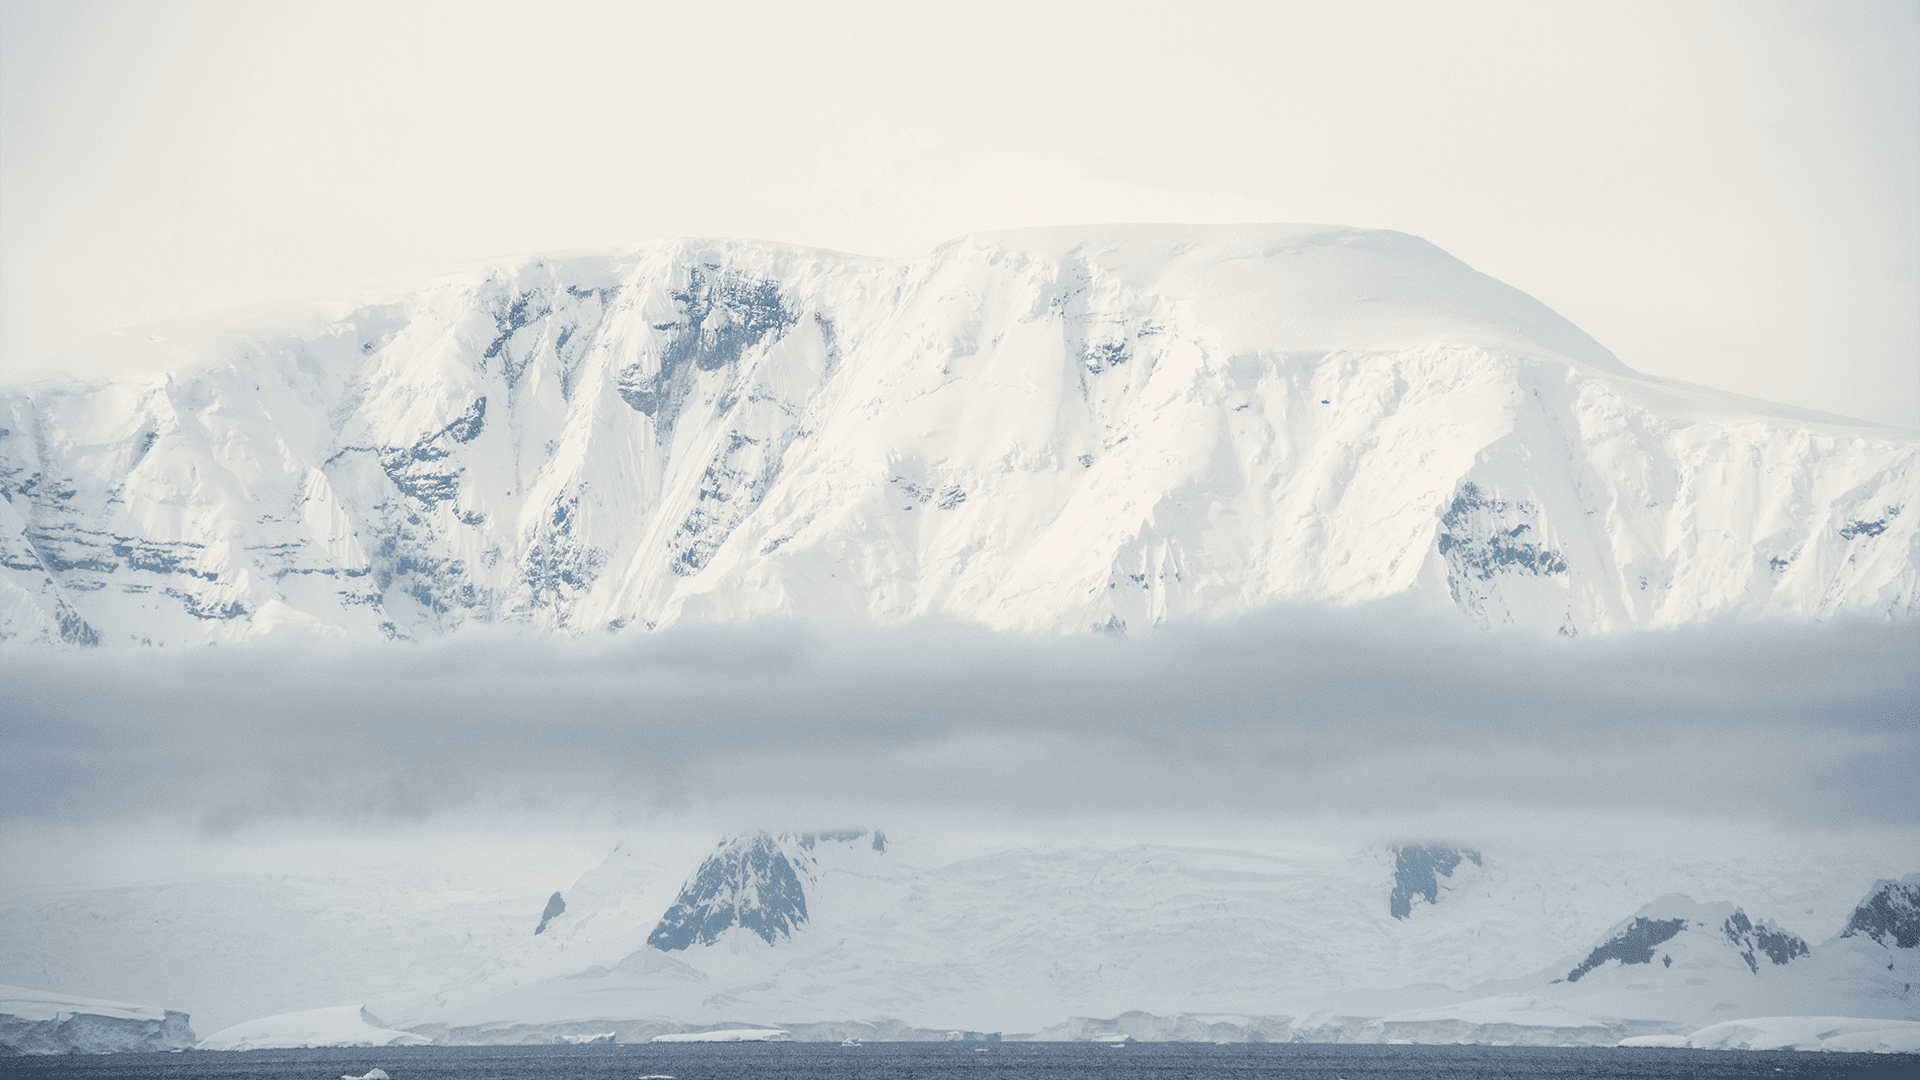 In Antarctica, a mountain peak receives snow from moving clouds in the distance. (Photo by Dan Lowenstein, © Woods Hole Oceanographic Institution)